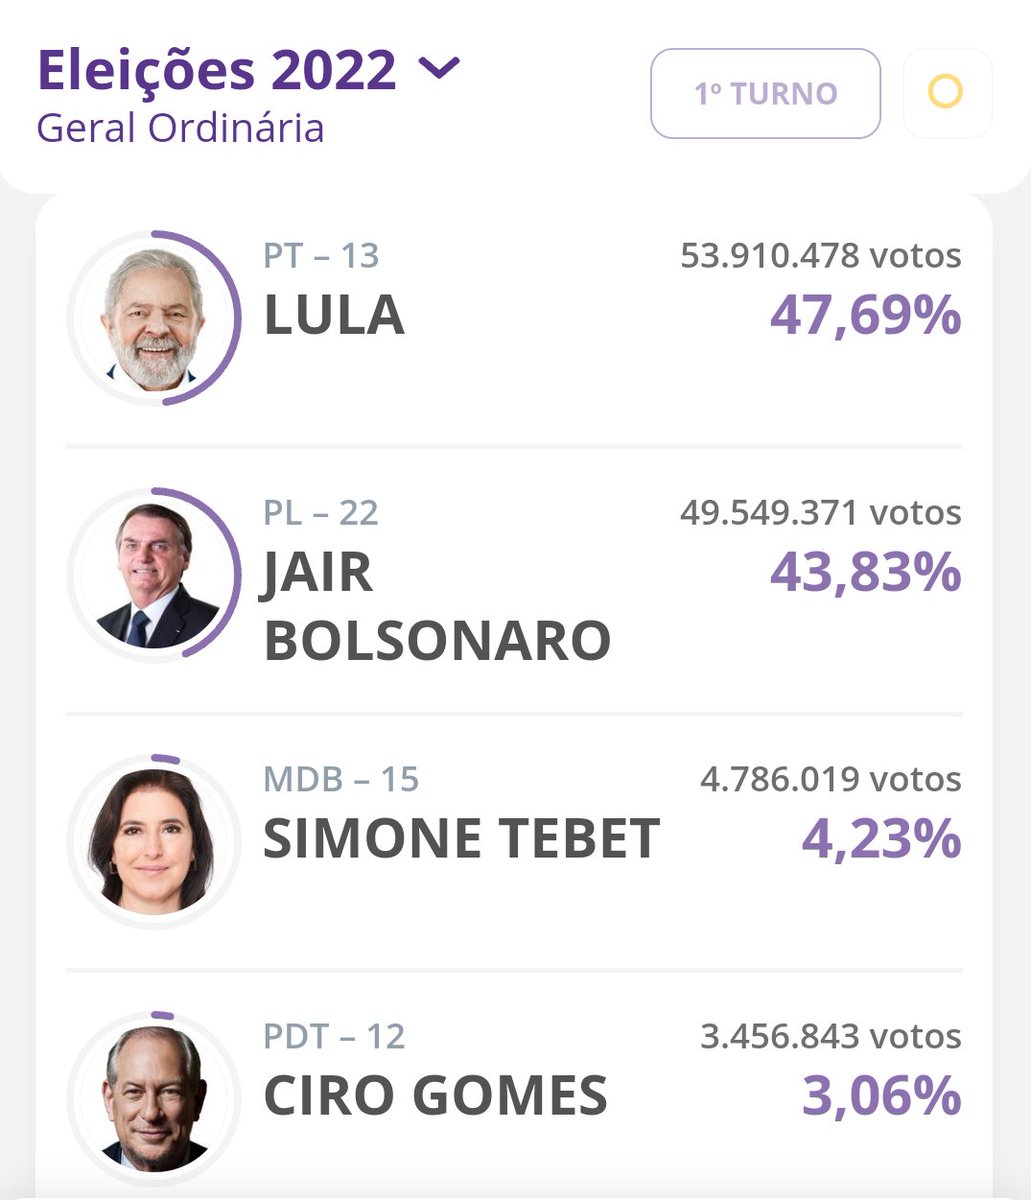 With 95% counted I think the situation is clear - Lula beat Bolsonaro today, but by less than expected. Regardless of what polling indicated, this is a remarkable turnaround for Brazil compared to the situation in 2021. On to the second round - Oct 30 resultados.tse.jus.br/oficial/app/in…